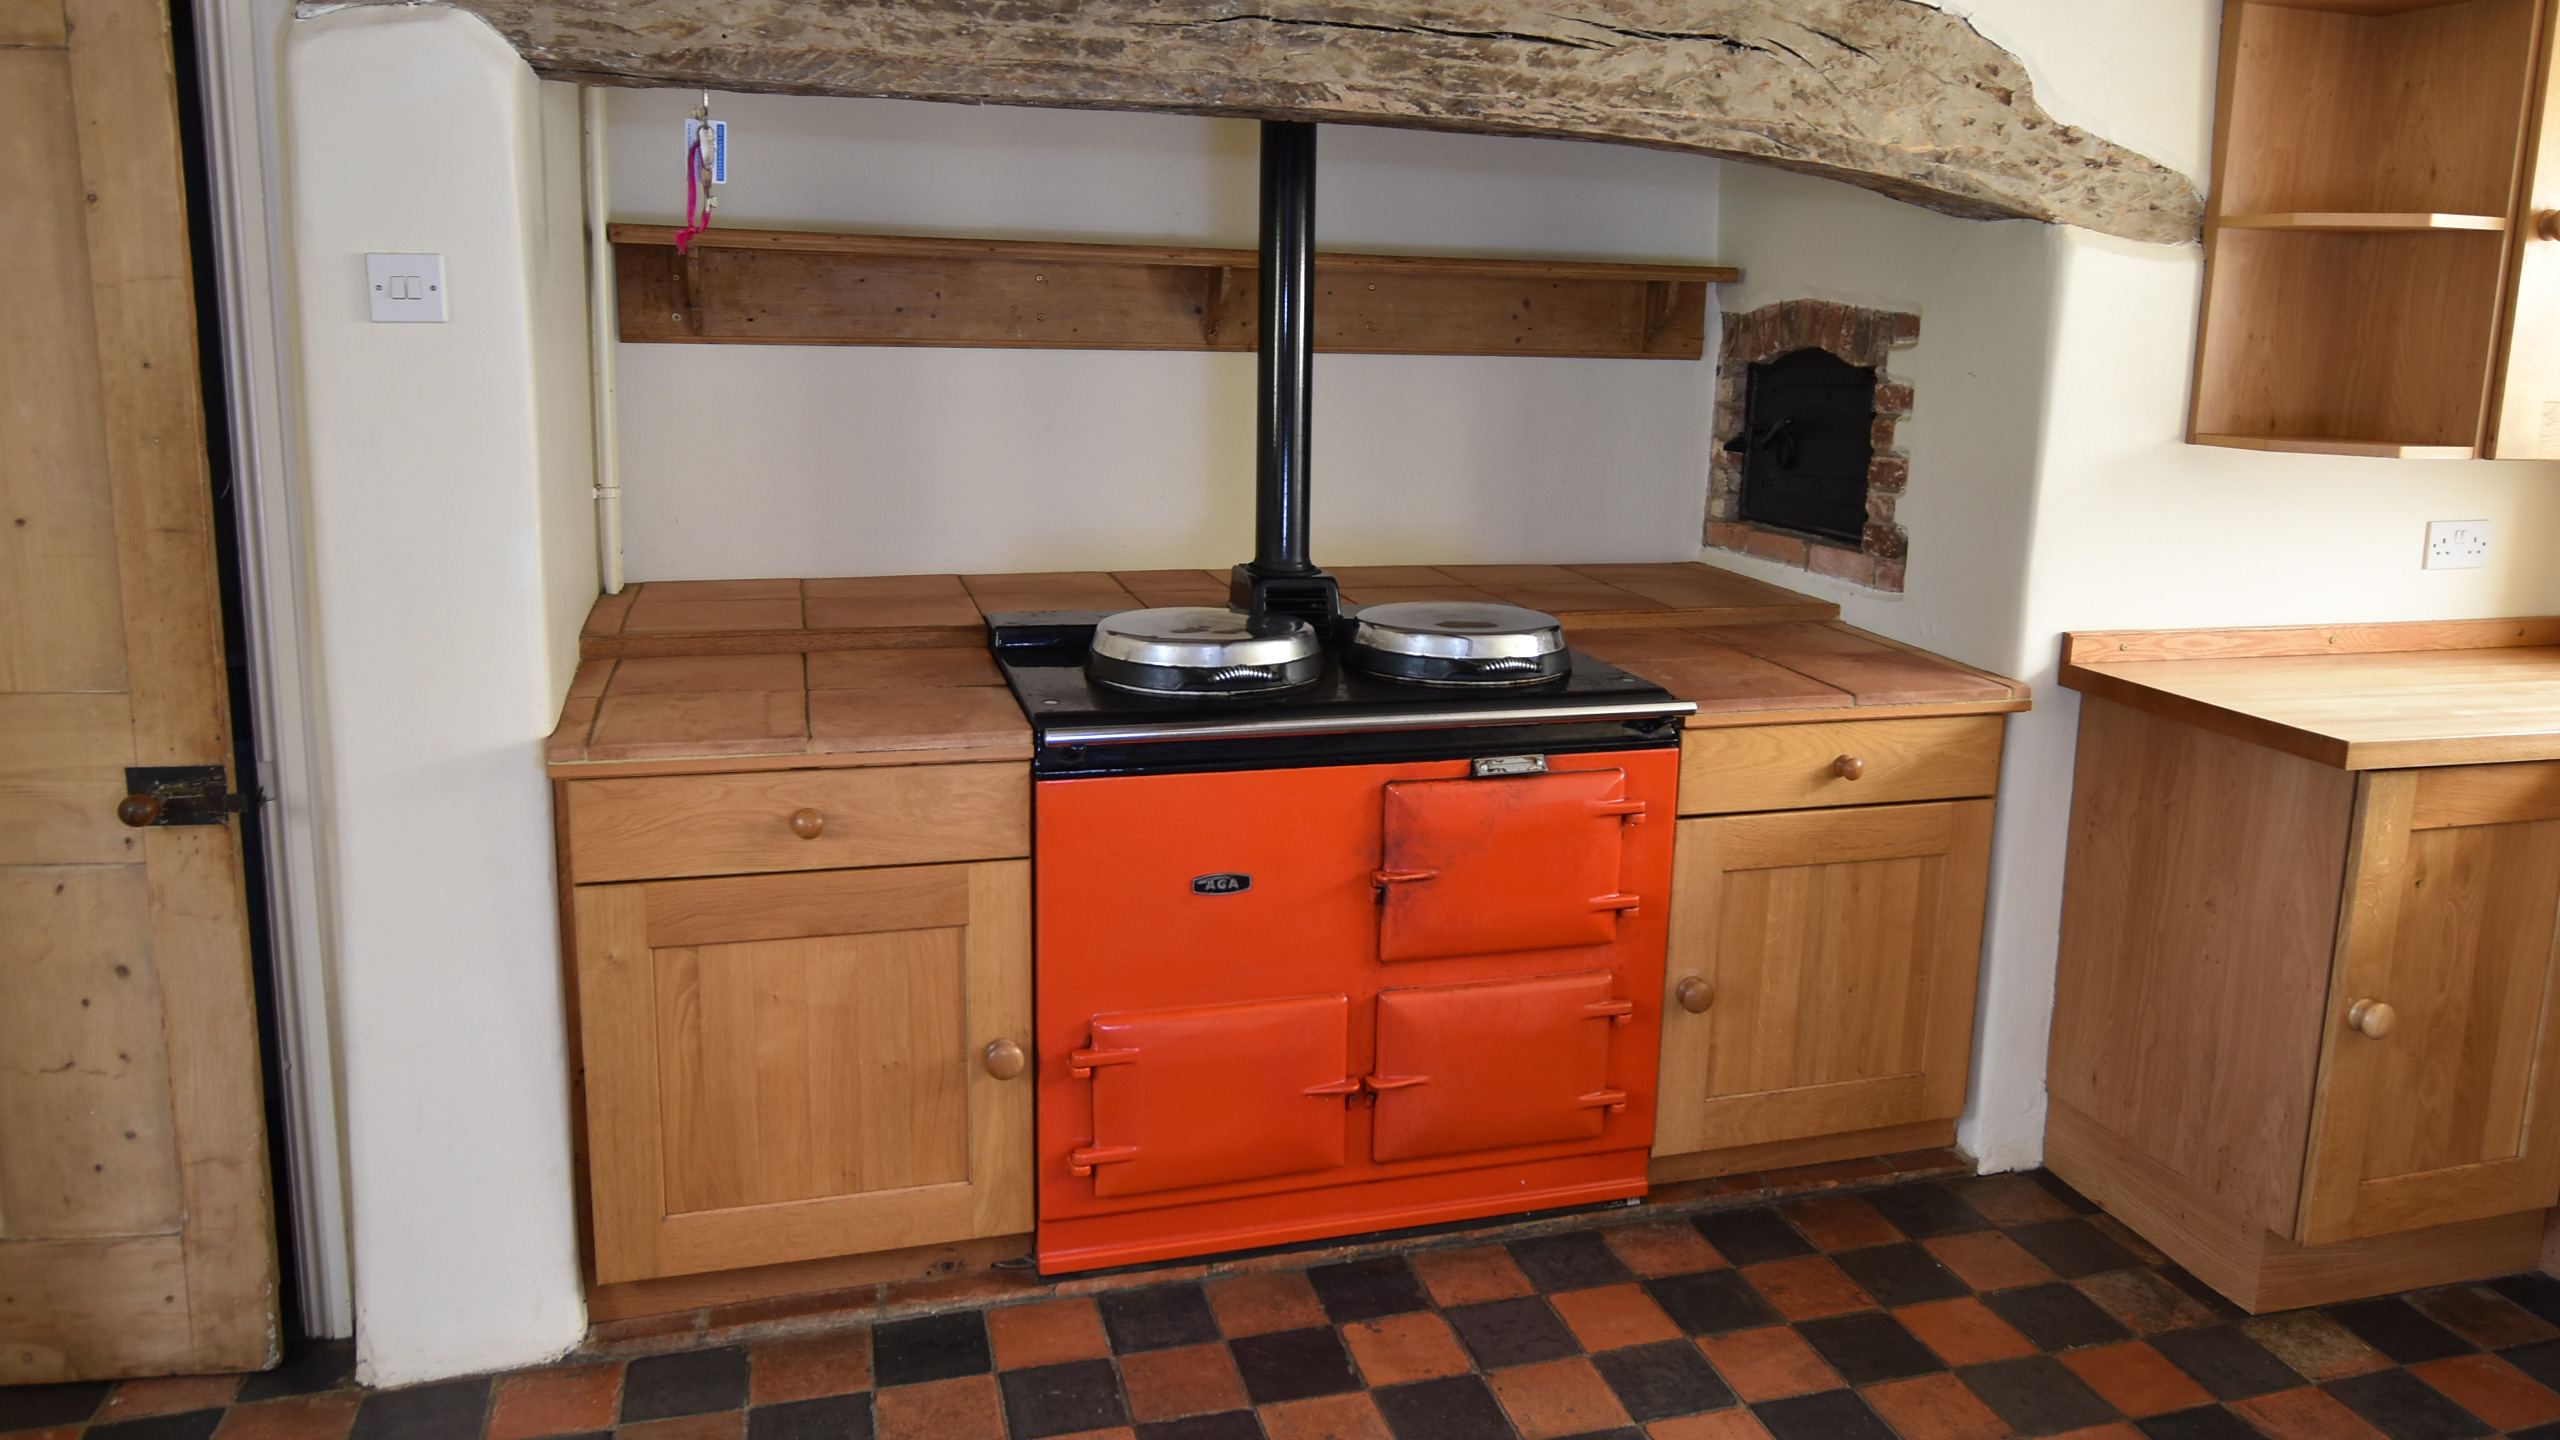 Post Office Cottage Oil Fired Aga & Original Bread Oven